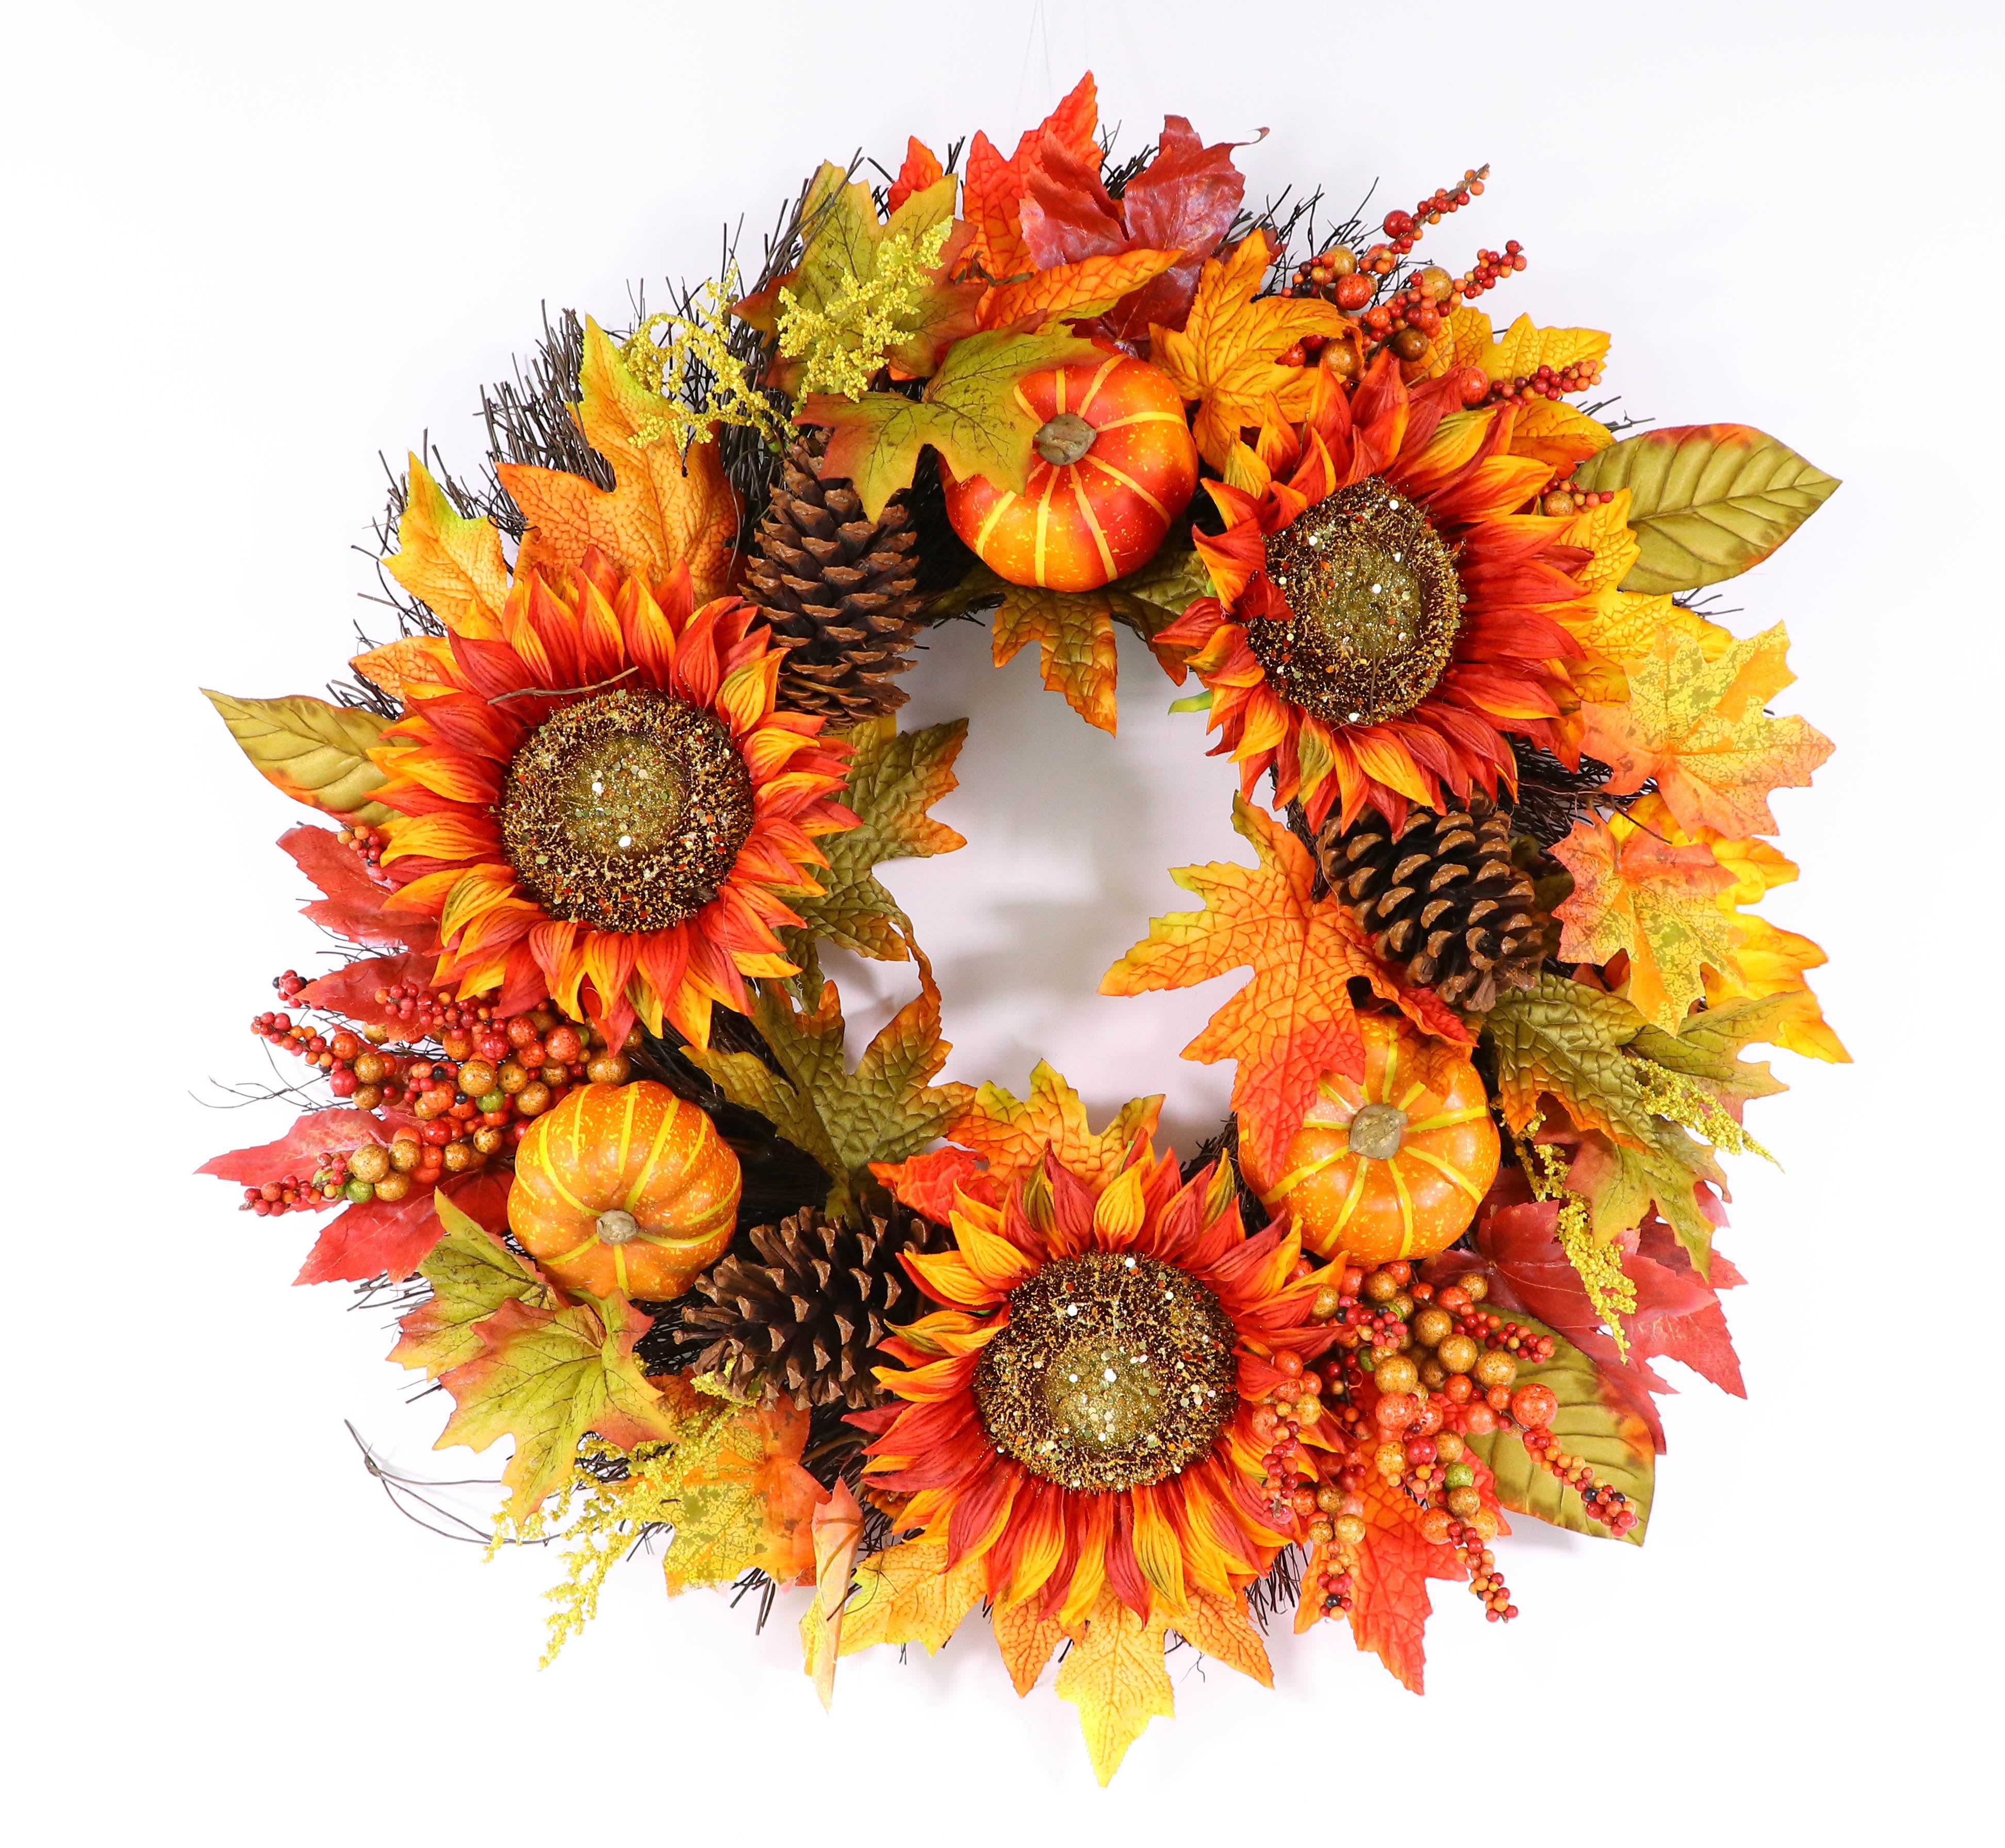 Artificial Fall Flower Wreath,Autumn Wreath with Wooden Welcome Sign Thanksgiving Wreath with Orange Daisies and Ears for Front Door Home Farmhouse Decor and Festival Celebration-20 Inches 